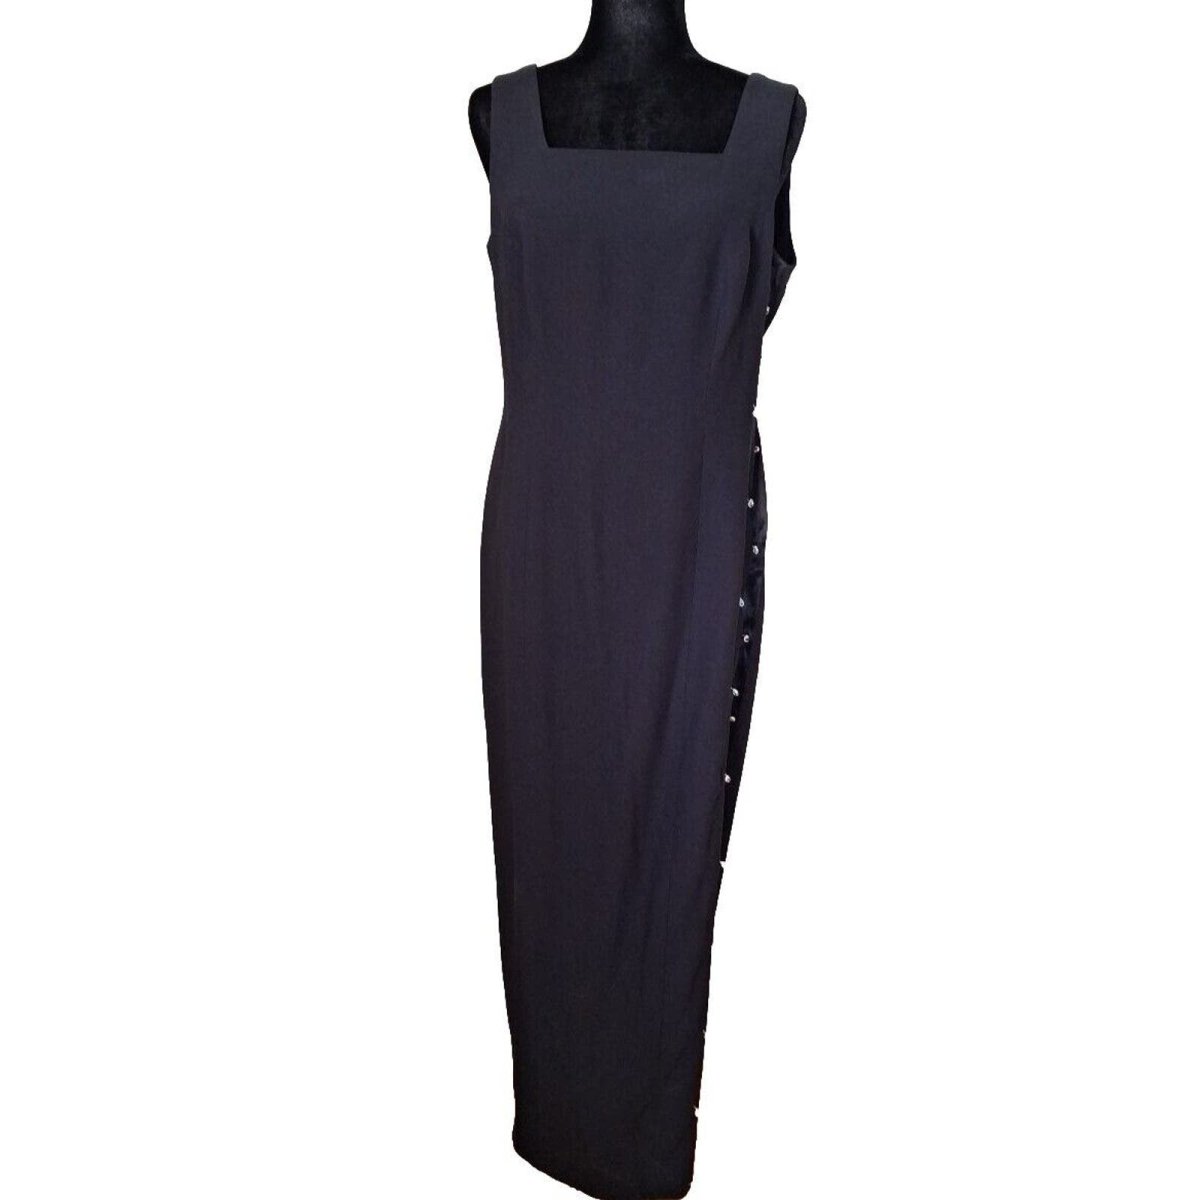 Vintage 90s Black Square Neck Formal Maxi Dress with Iridescent Bead Detail Women Size 8 M - themallvintage The Mall Vintage